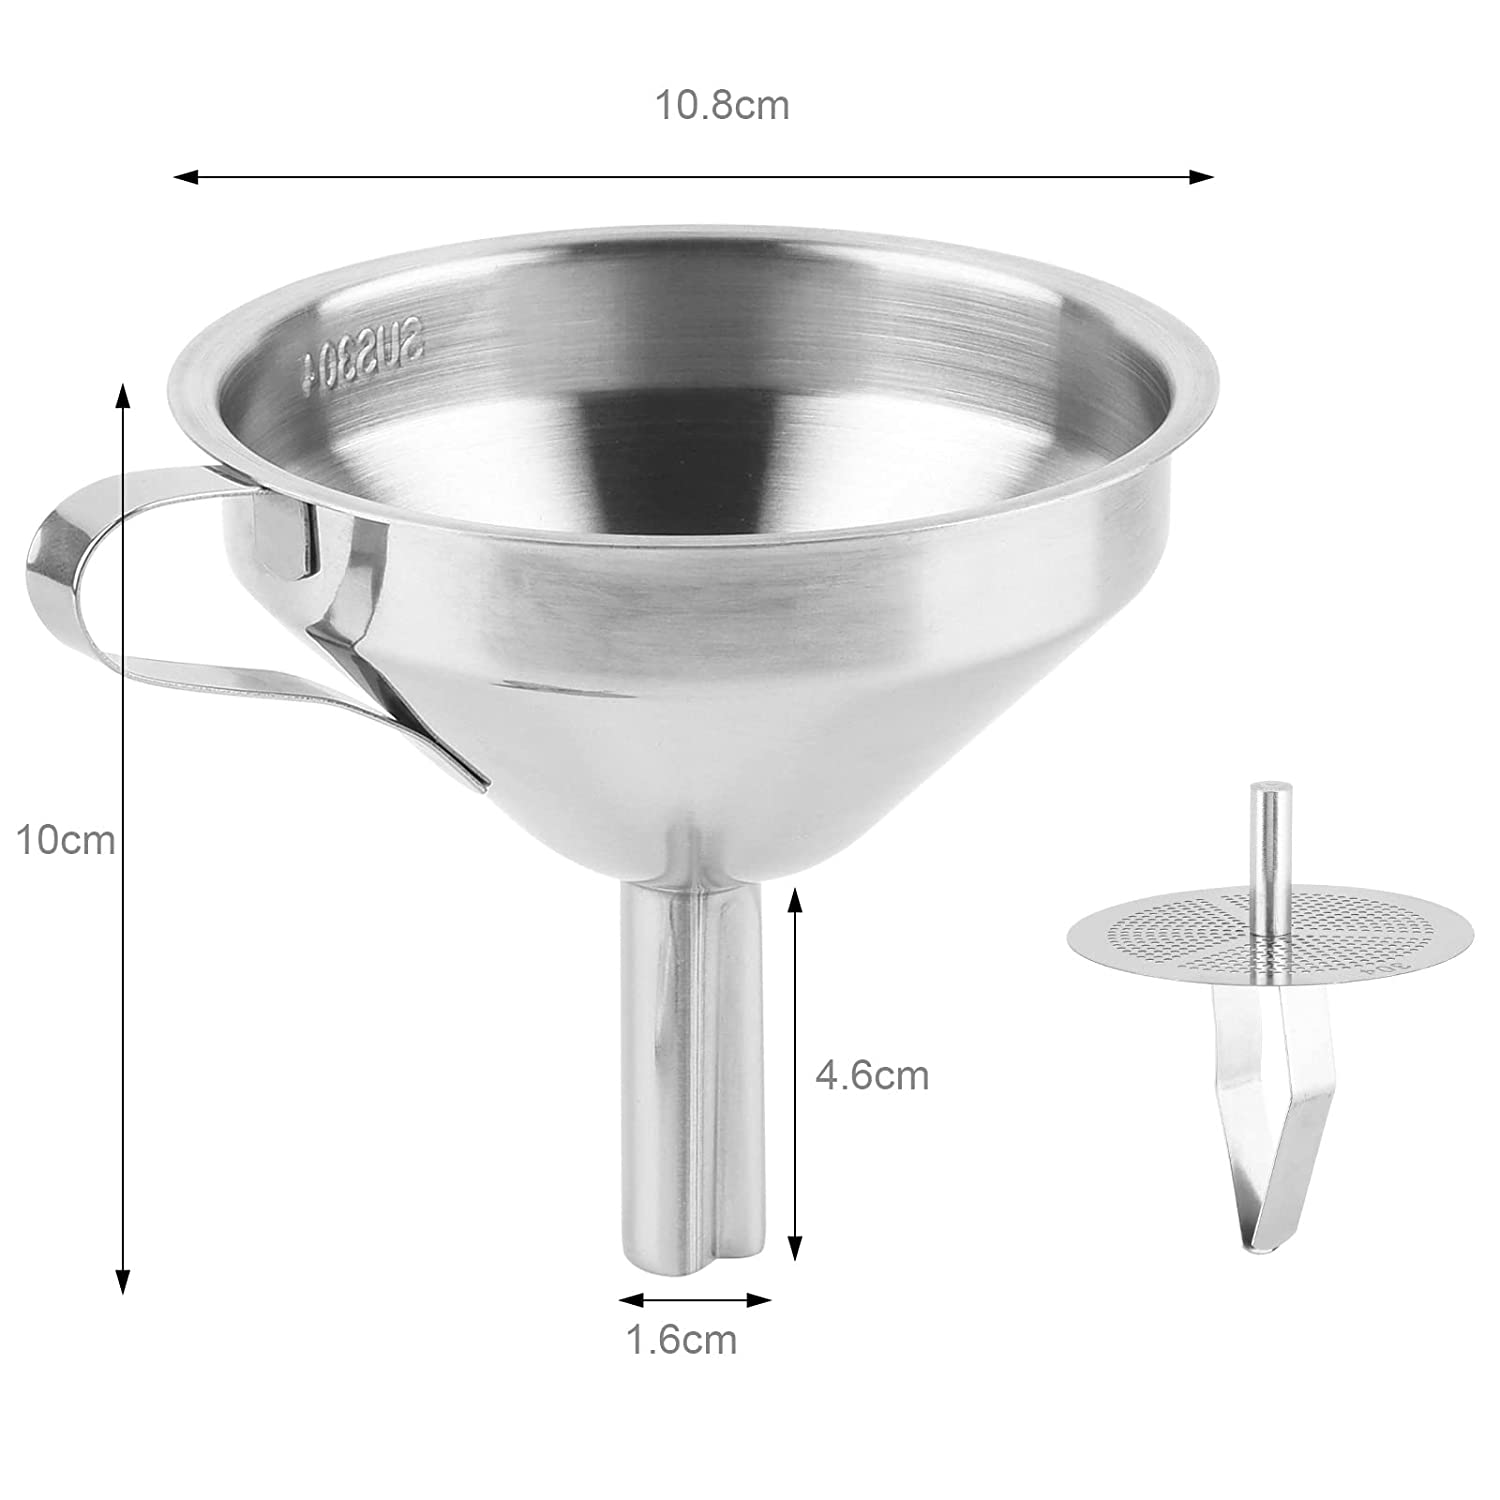 Cosmos 4 inch Stainless Steel Kitchen Funnel Metal Funnel with Removable Filter Rustproof Stainless Steel Funnel for Filtering-MF4